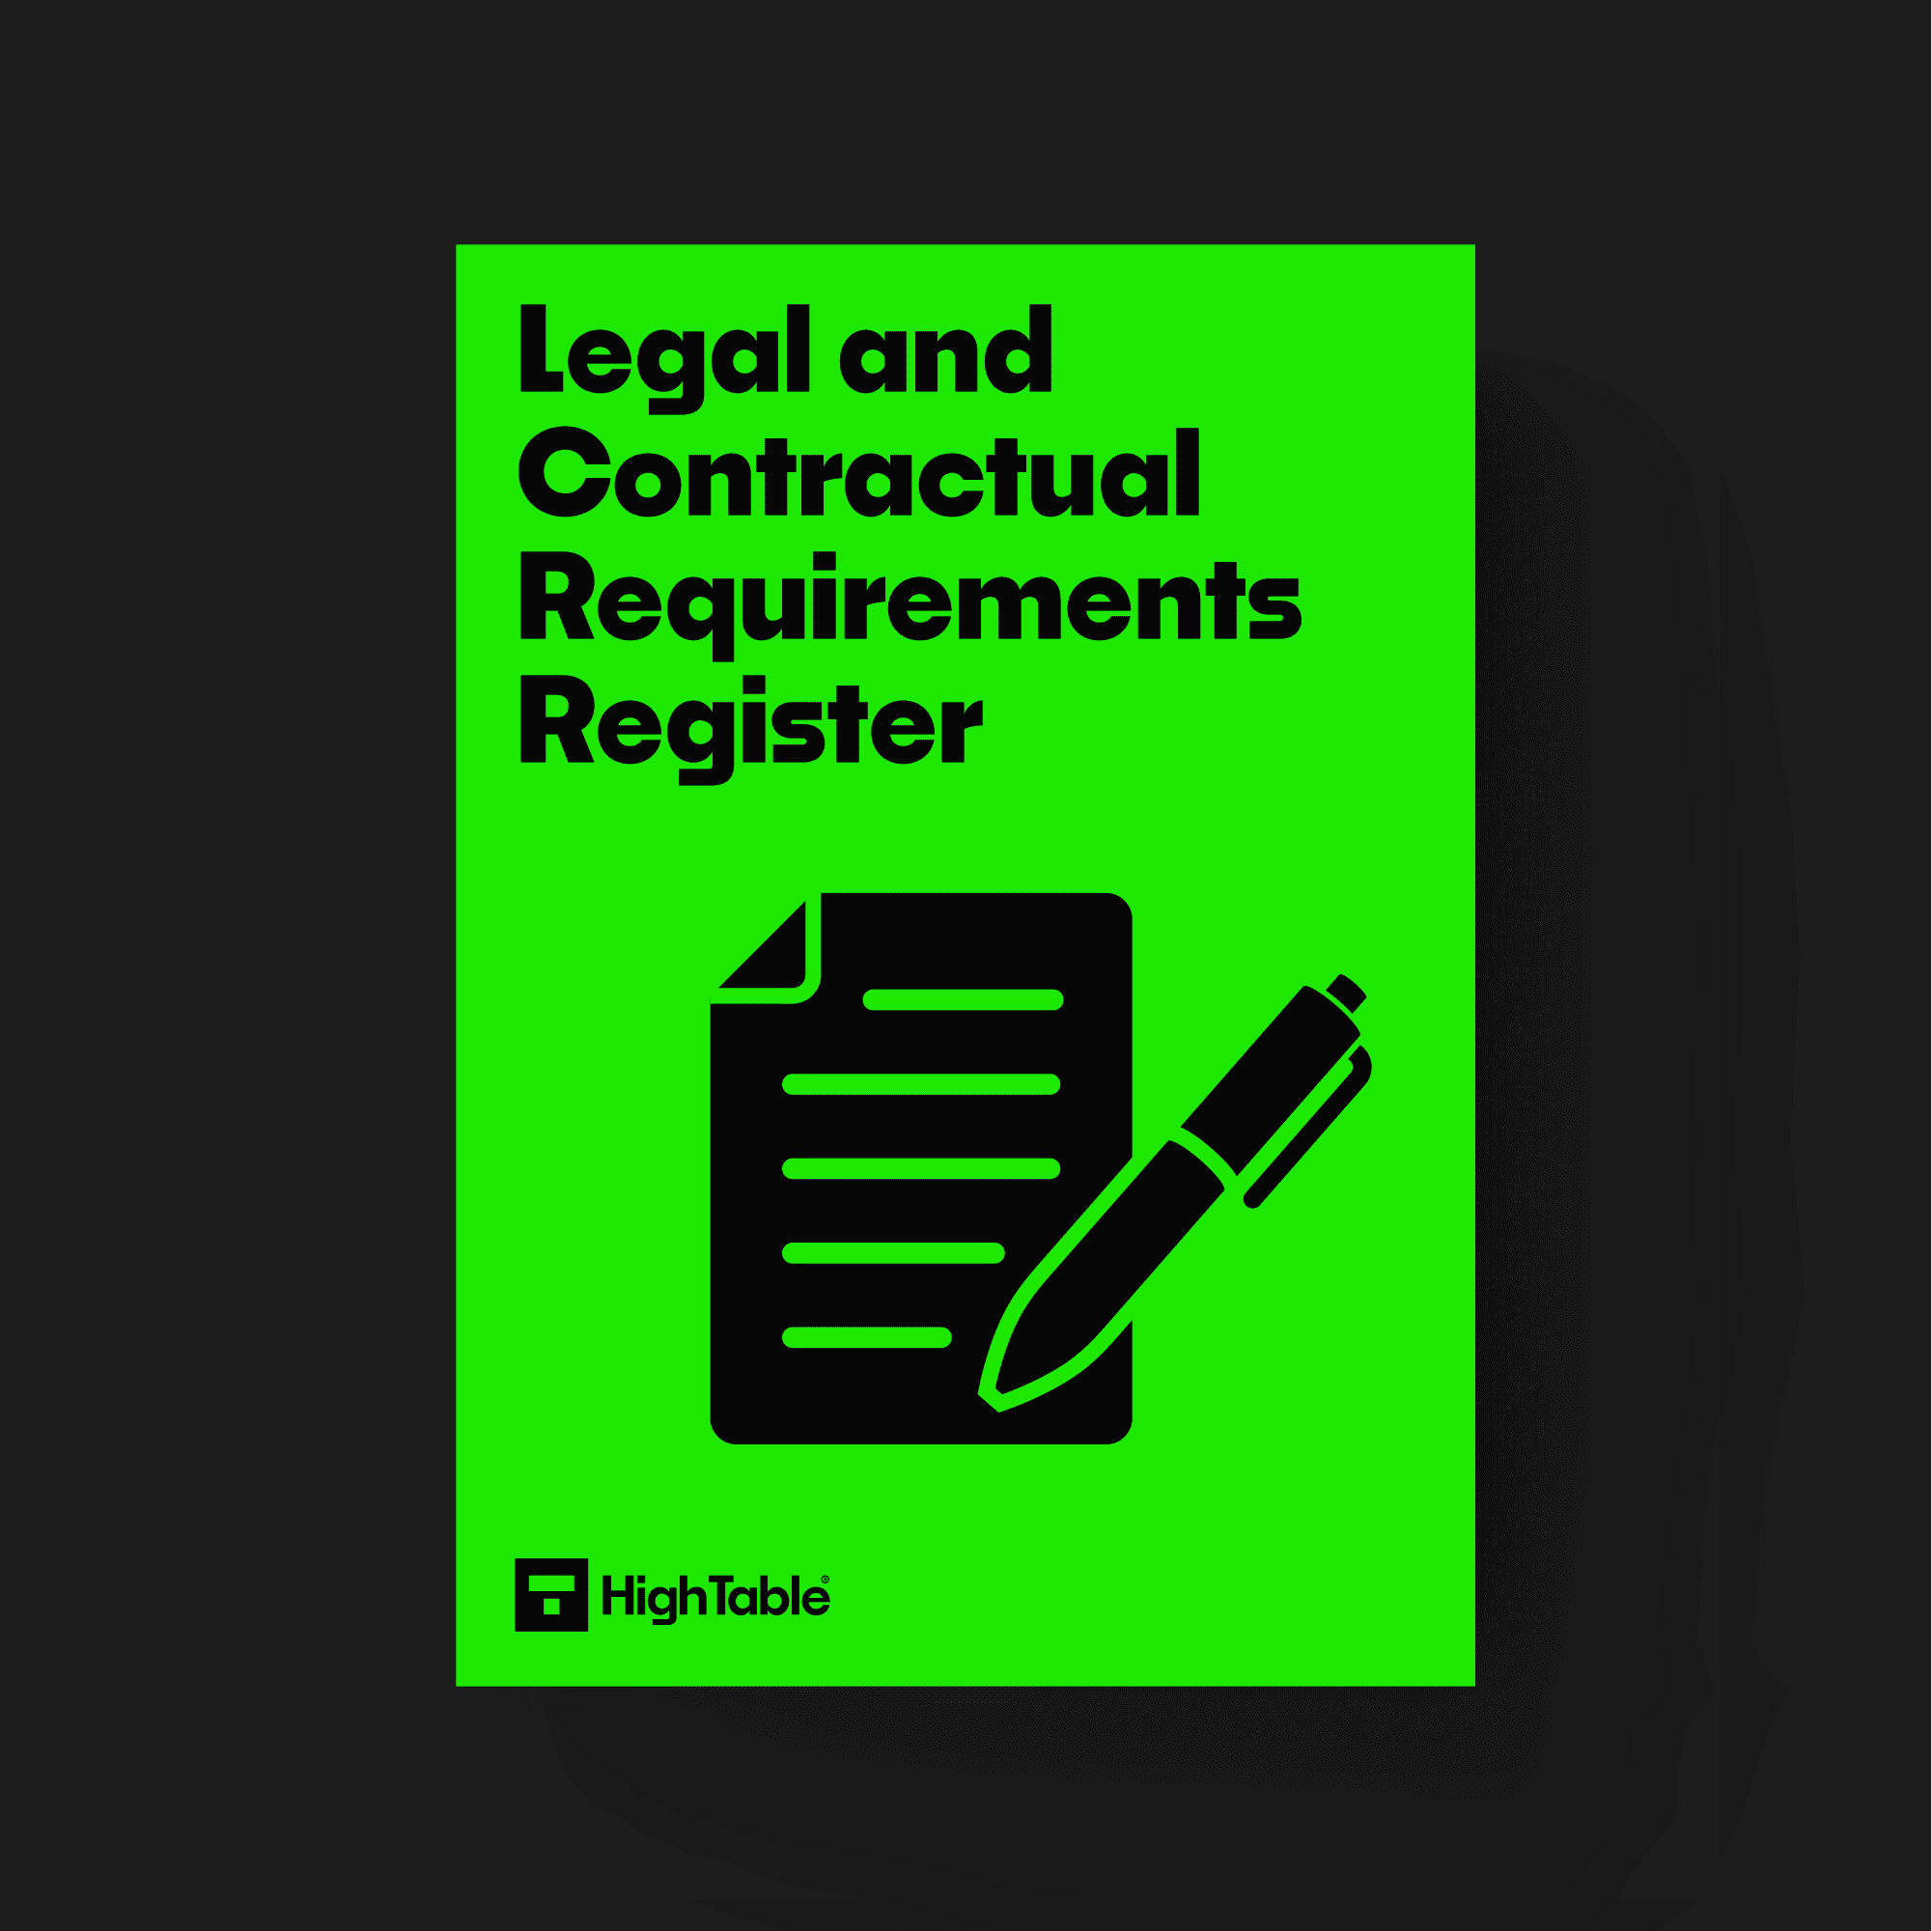 ISO 27001 Legal and Contractual Requirements Register Template